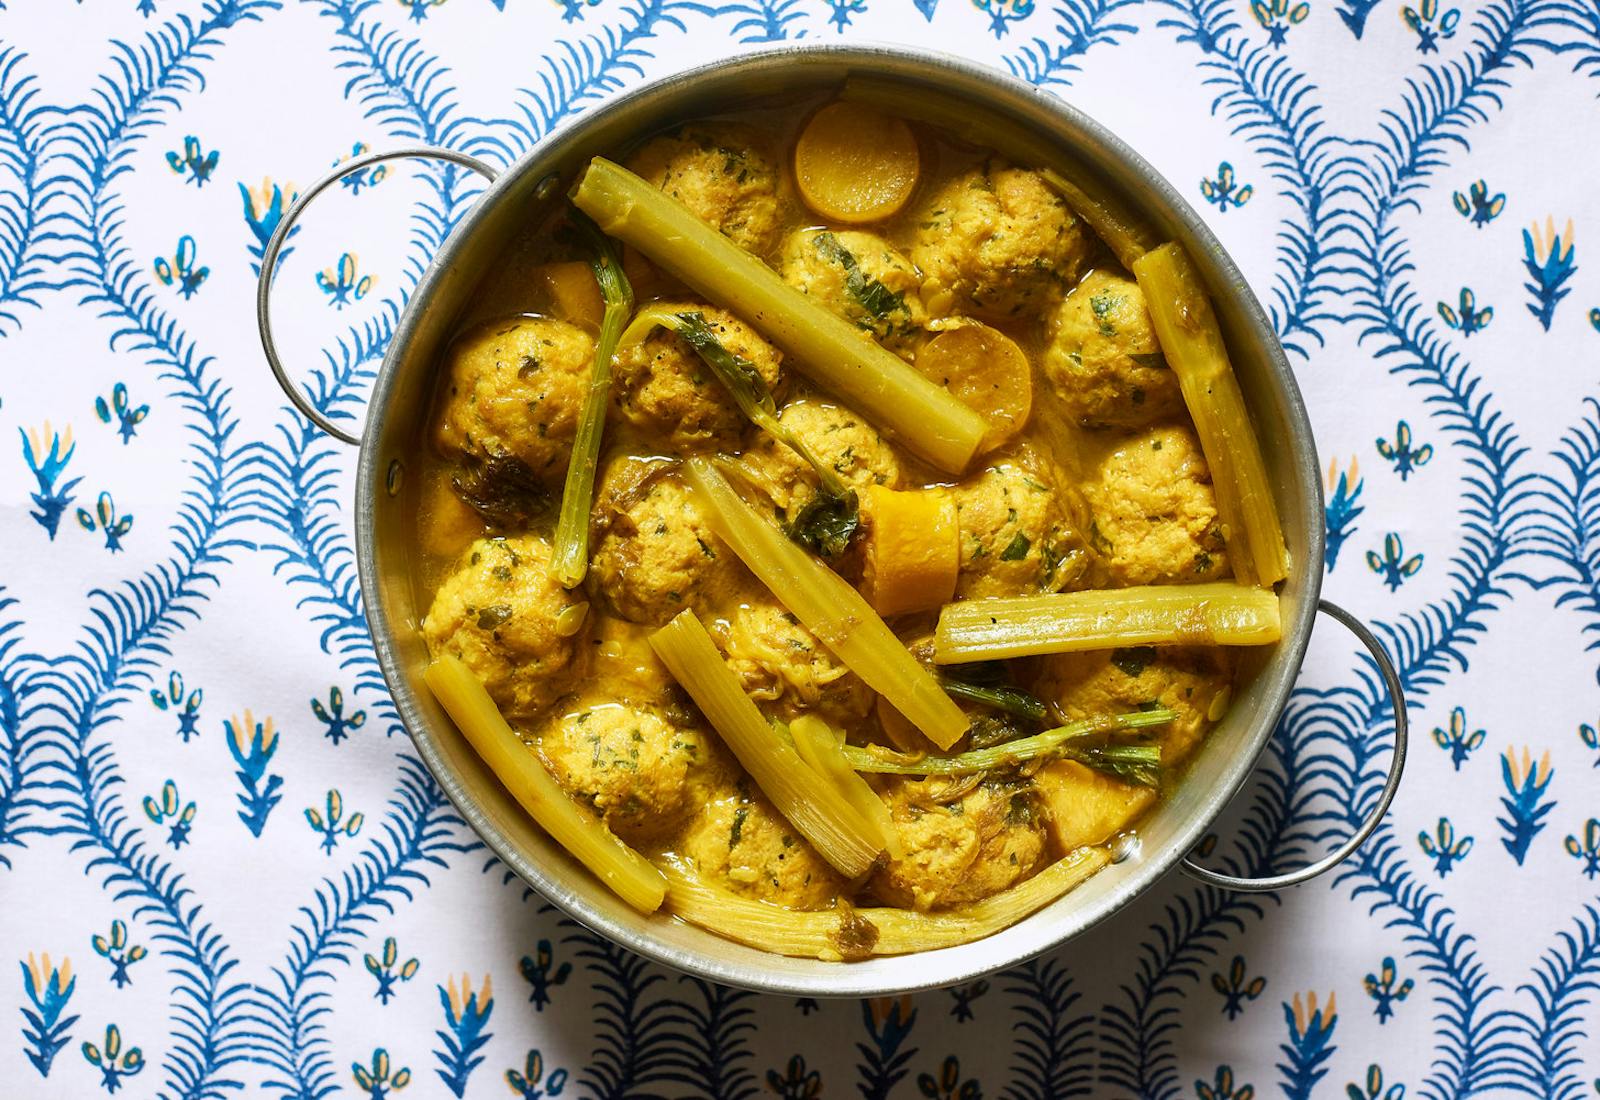 Moroccan turmeric chicken in metal pot atop blue and white tablecloth.